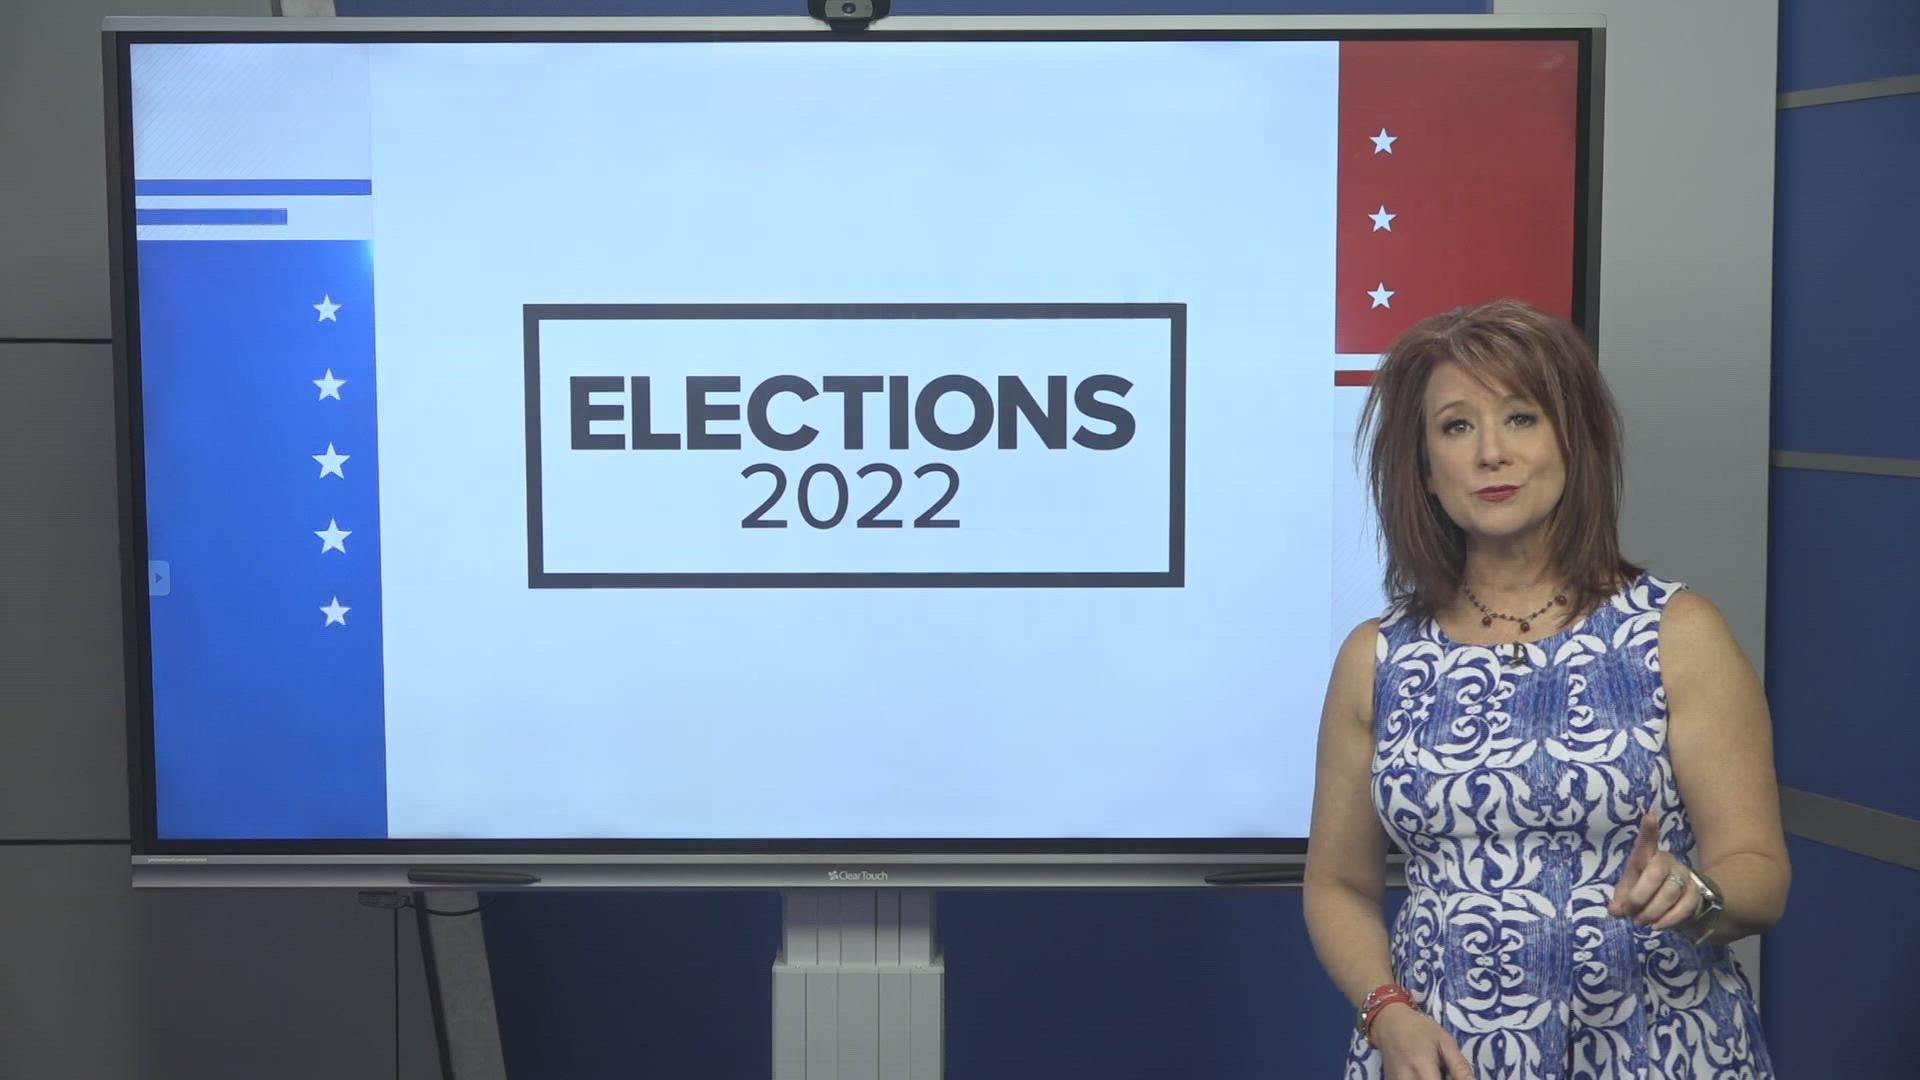 The 2022 Midterm election is Tuesday, November 8.